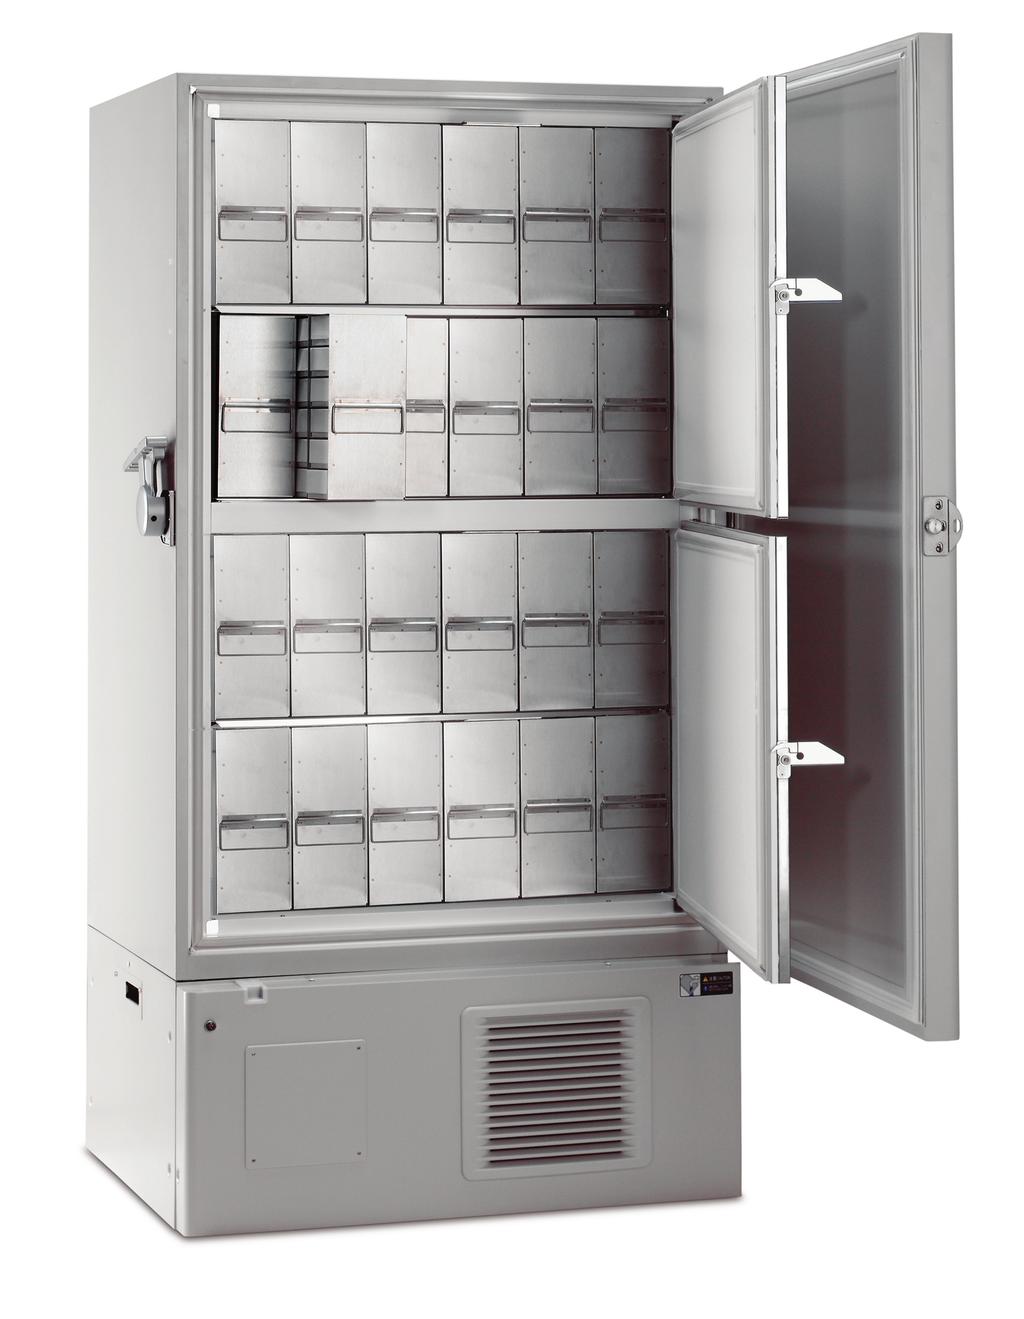 Solutions Integrated to Ultra-Low Temperature Freezers 1. SANYO patented V.I.P. Vacuum Insulation Panel cabinet construction offers superior insulation with maximum use of interior space. 2.